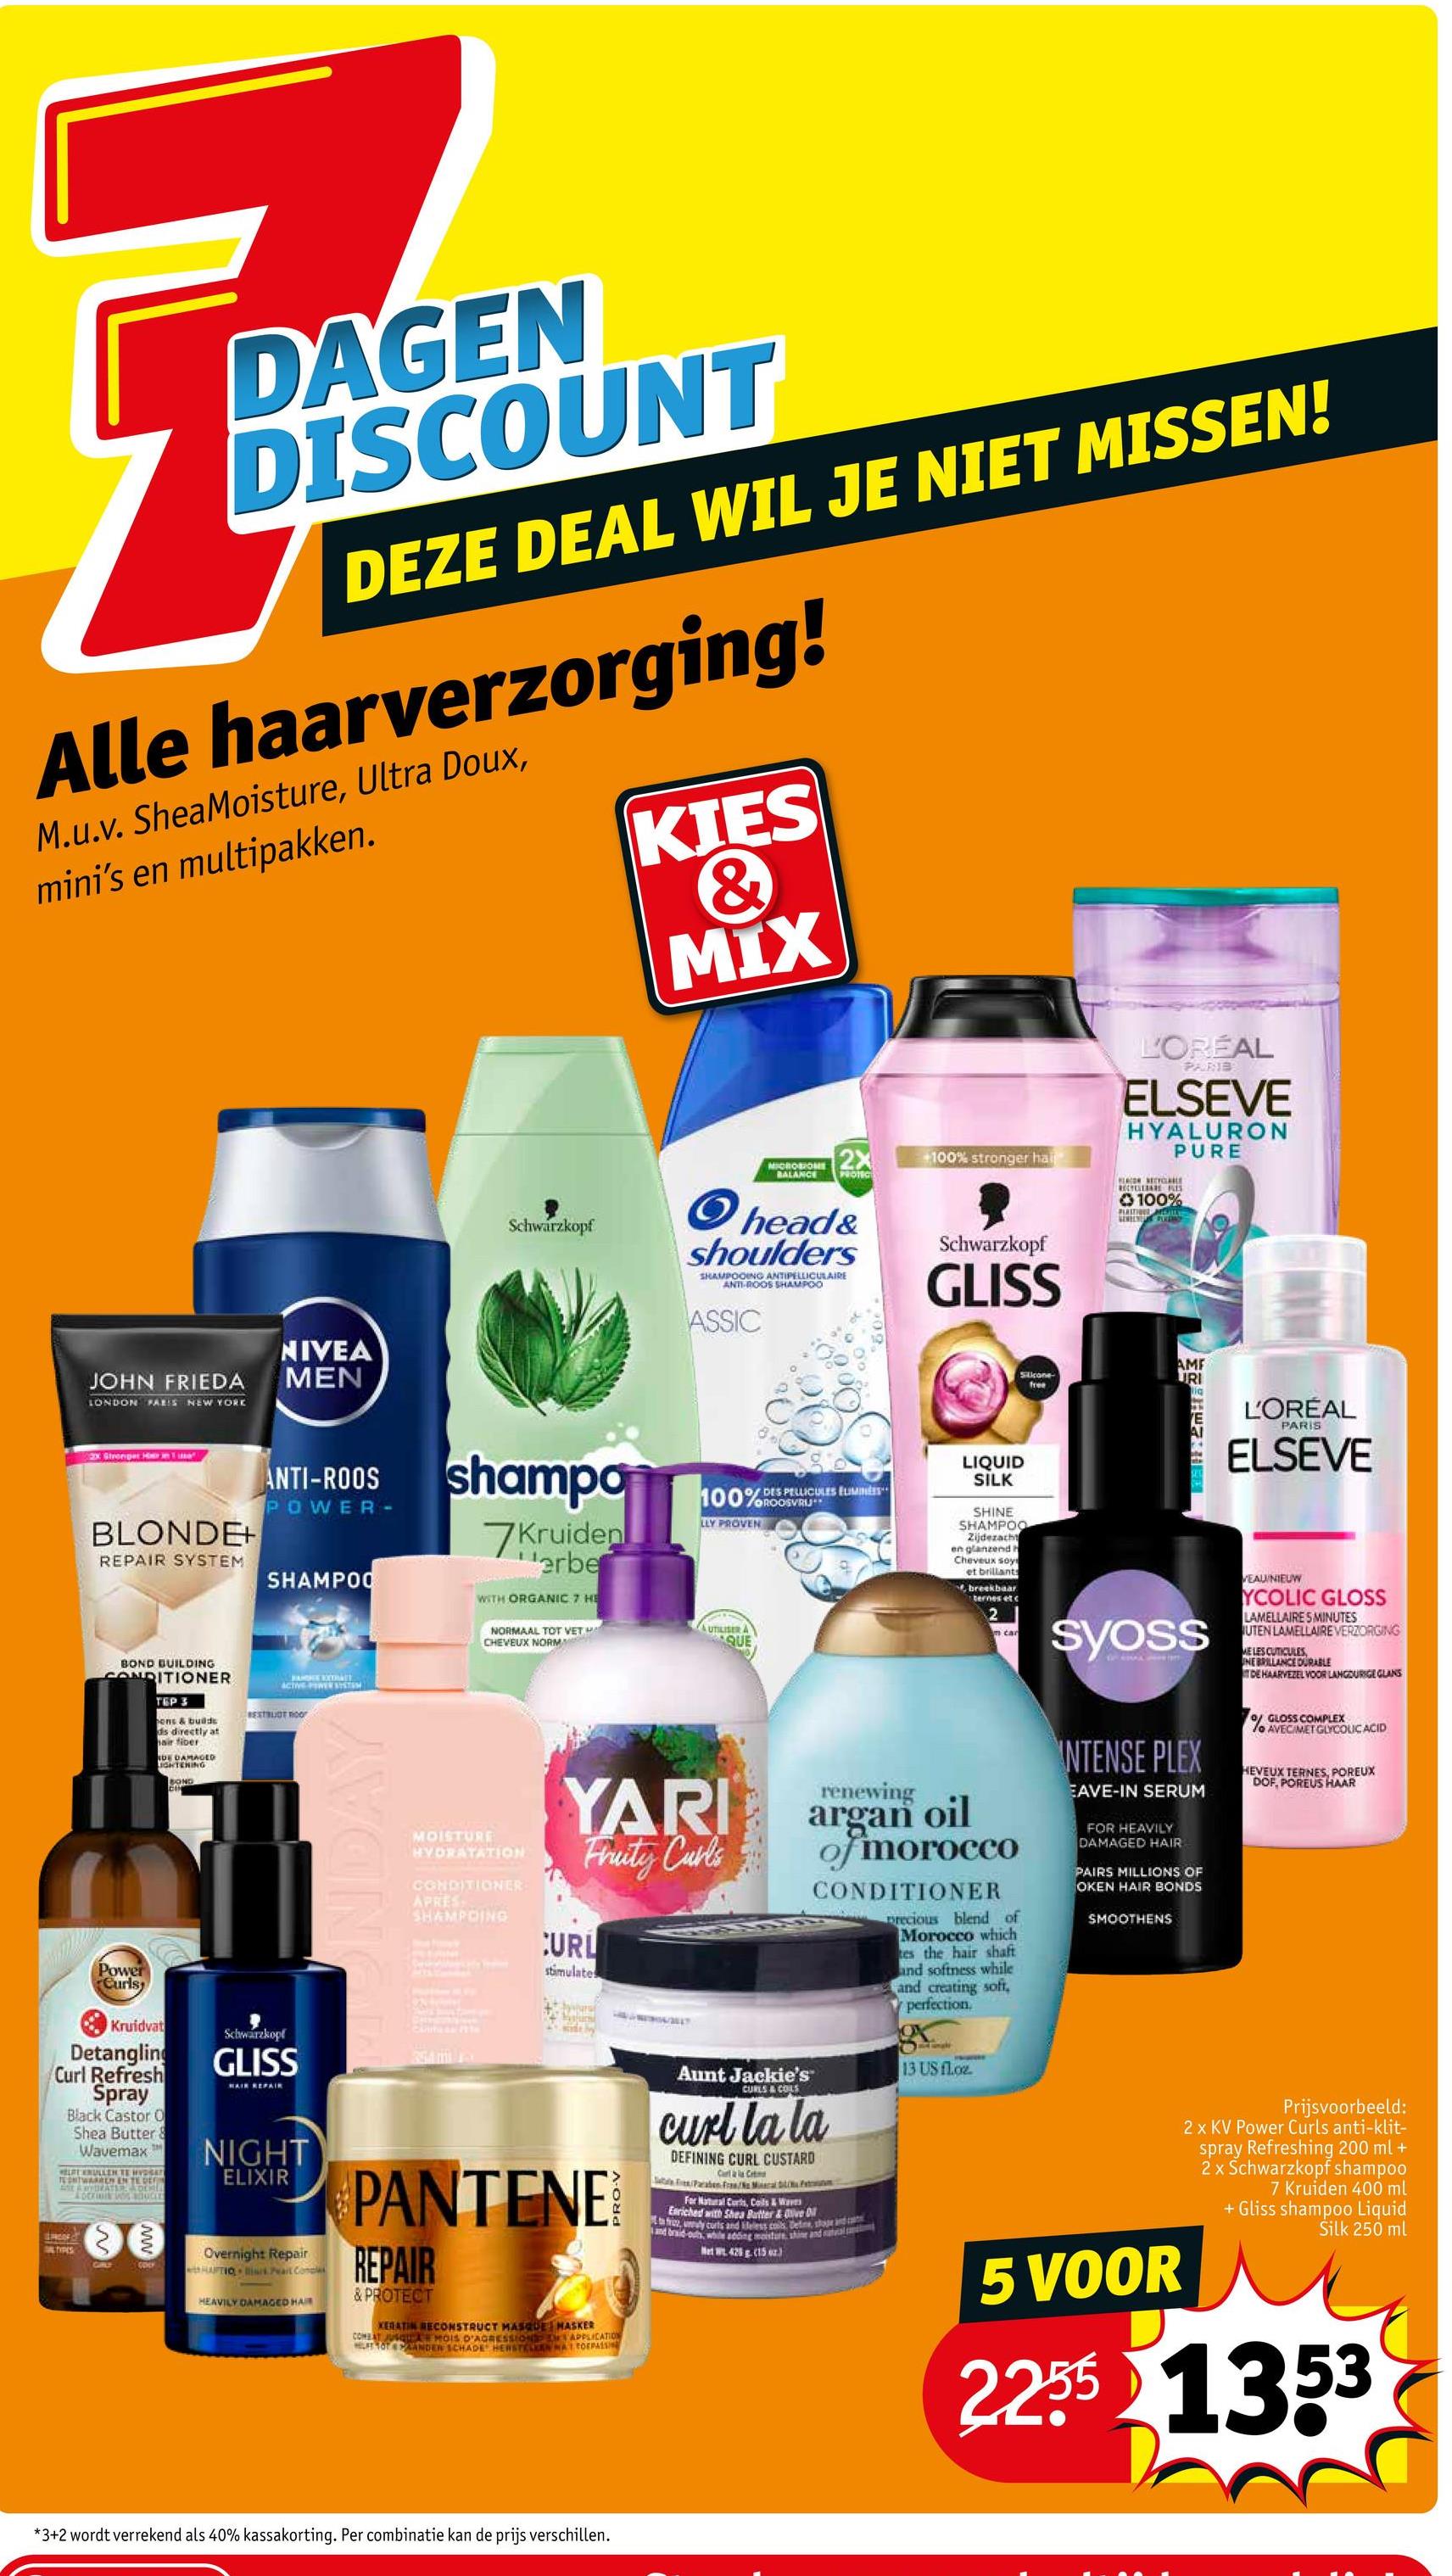 DAGEN
DISCOUNT
DEZE DEAL WIL JE NIET MISSEN!
Alle haarverzorging!
M.u.v. SheaMoisture, Ultra Doux,
mini's en multipakken.
KIES
&
MIX
JOHN FRIEDA
LONDON PARIS NEW YORK
NIVEA
MEN
Schwarzkopf
L'ORÉAL
PARIB
ELSEVE
HYALURON
PURE
MICROBIOME 2X
BALANCE PROTEC
head&
shoulders
SHAMPOOING ANTIPELLICULAIRE
ANTI-ROOS SHAMPOO
ASSIC
+100% stronger hai
Schwarzkopf
GLISS
BLACOR SECYCLARE
100%
PLASTION FESTLY
LEVEN POL
Silicone
AMF
URI
free
2x Stronger in Tia
BLONDE+
REPAIR SYSTEM
ANTI-ROOS
POWER-
SHAMPOO
Active PSYSTEM
BOND BUILDING
CONDITIONER
TEP 3
ens & build
ds directly at
hair fiber
DE DAMAGED
IGHTERING
BOND
BESTBLOT ROO
Power
Curls
T
Kruidvat
Detangling
Curl Refresh
Spray
Black Castor O
Shea Butter &
Wavemax
TENTWARREN EN TE DE
A ARTURATE OCH
LOCKININ SUCCES
Schwarzkopf
GLISS
HAIR REPAIR
NIGHT
ELIXIR
www
SPROOF
TIPS
GIRLT
GOLY
Overnight Repair
HAUTIO is Peart Comple
HEAVILY DAMAGED HAR
shampo
7Kruiden
erbe
WITH ORGANIC 7 HE
NORMAAL TOT VET H
CHEVEUX NORM
MOISTURE
HYDRATATION
CONDITIONER
APRES
SHAMPOING
100%ROOSVRU
of DES PELLICULES EUMINES
LLY PROVEN
UTILISER A
QUE
YARI
Fruity Curls
CURL
stimulates
A
PANTENE
REPAIR
& PROTECT
KERATIN RECONSTRUCT MASQUE MASKER
COMBAT JUSQUAMOIS D'AGRESSION
APPLICATION
HURT TOT PANDER SCHADE HERSTELERN MAT TOEPASSI
Aunt Jackie's™
CURLS & COLS
renewing
LIQUID
SILK
SHINE
SHAMPOO
Zijdezacht
en glanzend h
Cheveux soy
et brillants
breekbaar
ternes et c
2
m car
argan oil
of morocco
CONDITIONER
curl la la
DEFINING CURL CUSTARD
Carl & la Crim
Paraben Free Mal
For Natural Curts, Coils & Wars
Enriched with Shea Butter & Ove D
ta fricz, unly curts and lifeless coils. Define, stage and c
and braid-outh, while adding moisture shine and natal ca
Met W. 425 g (15 oz.)
precious blend of
Morocco which
tes the hair shaft
and softness while
and creating soft,
perfection,
gr
13 US floz
Syoss
INTENSE PLEX
EAVE-IN SERUM
FOR HEAVILY
DAMAGED HAIR
PAIRS MILLIONS OF
OKEN HAIR BONDS
SMOOTHENS
5 VOOR
L'ORÉAL
PARIS
ELSEVE
VEAU/NIEUW
YCOLIC GLOSS
LAMELLAIRE 5 MINUTES
UTEN LAMELLAIRE VERZORGING
ME LES CUTICULES
INE BRILLANCE DURABLE
DE HAARVEZEL VOOR LANGDURIGE GLANS
o GLOSS COMPLEX
lo AVEC/MET GLYCOLIC ACID
HEVEUX TERNES, POREUX
DOF, POREUS HAAR
Prijsvoorbeeld:
2 x KV Power Curls anti-klit-
spray Refreshing 200 ml +
2 x Schwarzkopf shampoo
7 Kruiden 400 ml
+ Gliss shampoo Liquid
Silk 250 ml
22551353
*3+2 wordt verrekend als 40% kassakorting. Per combinatie kan de prijs verschillen.